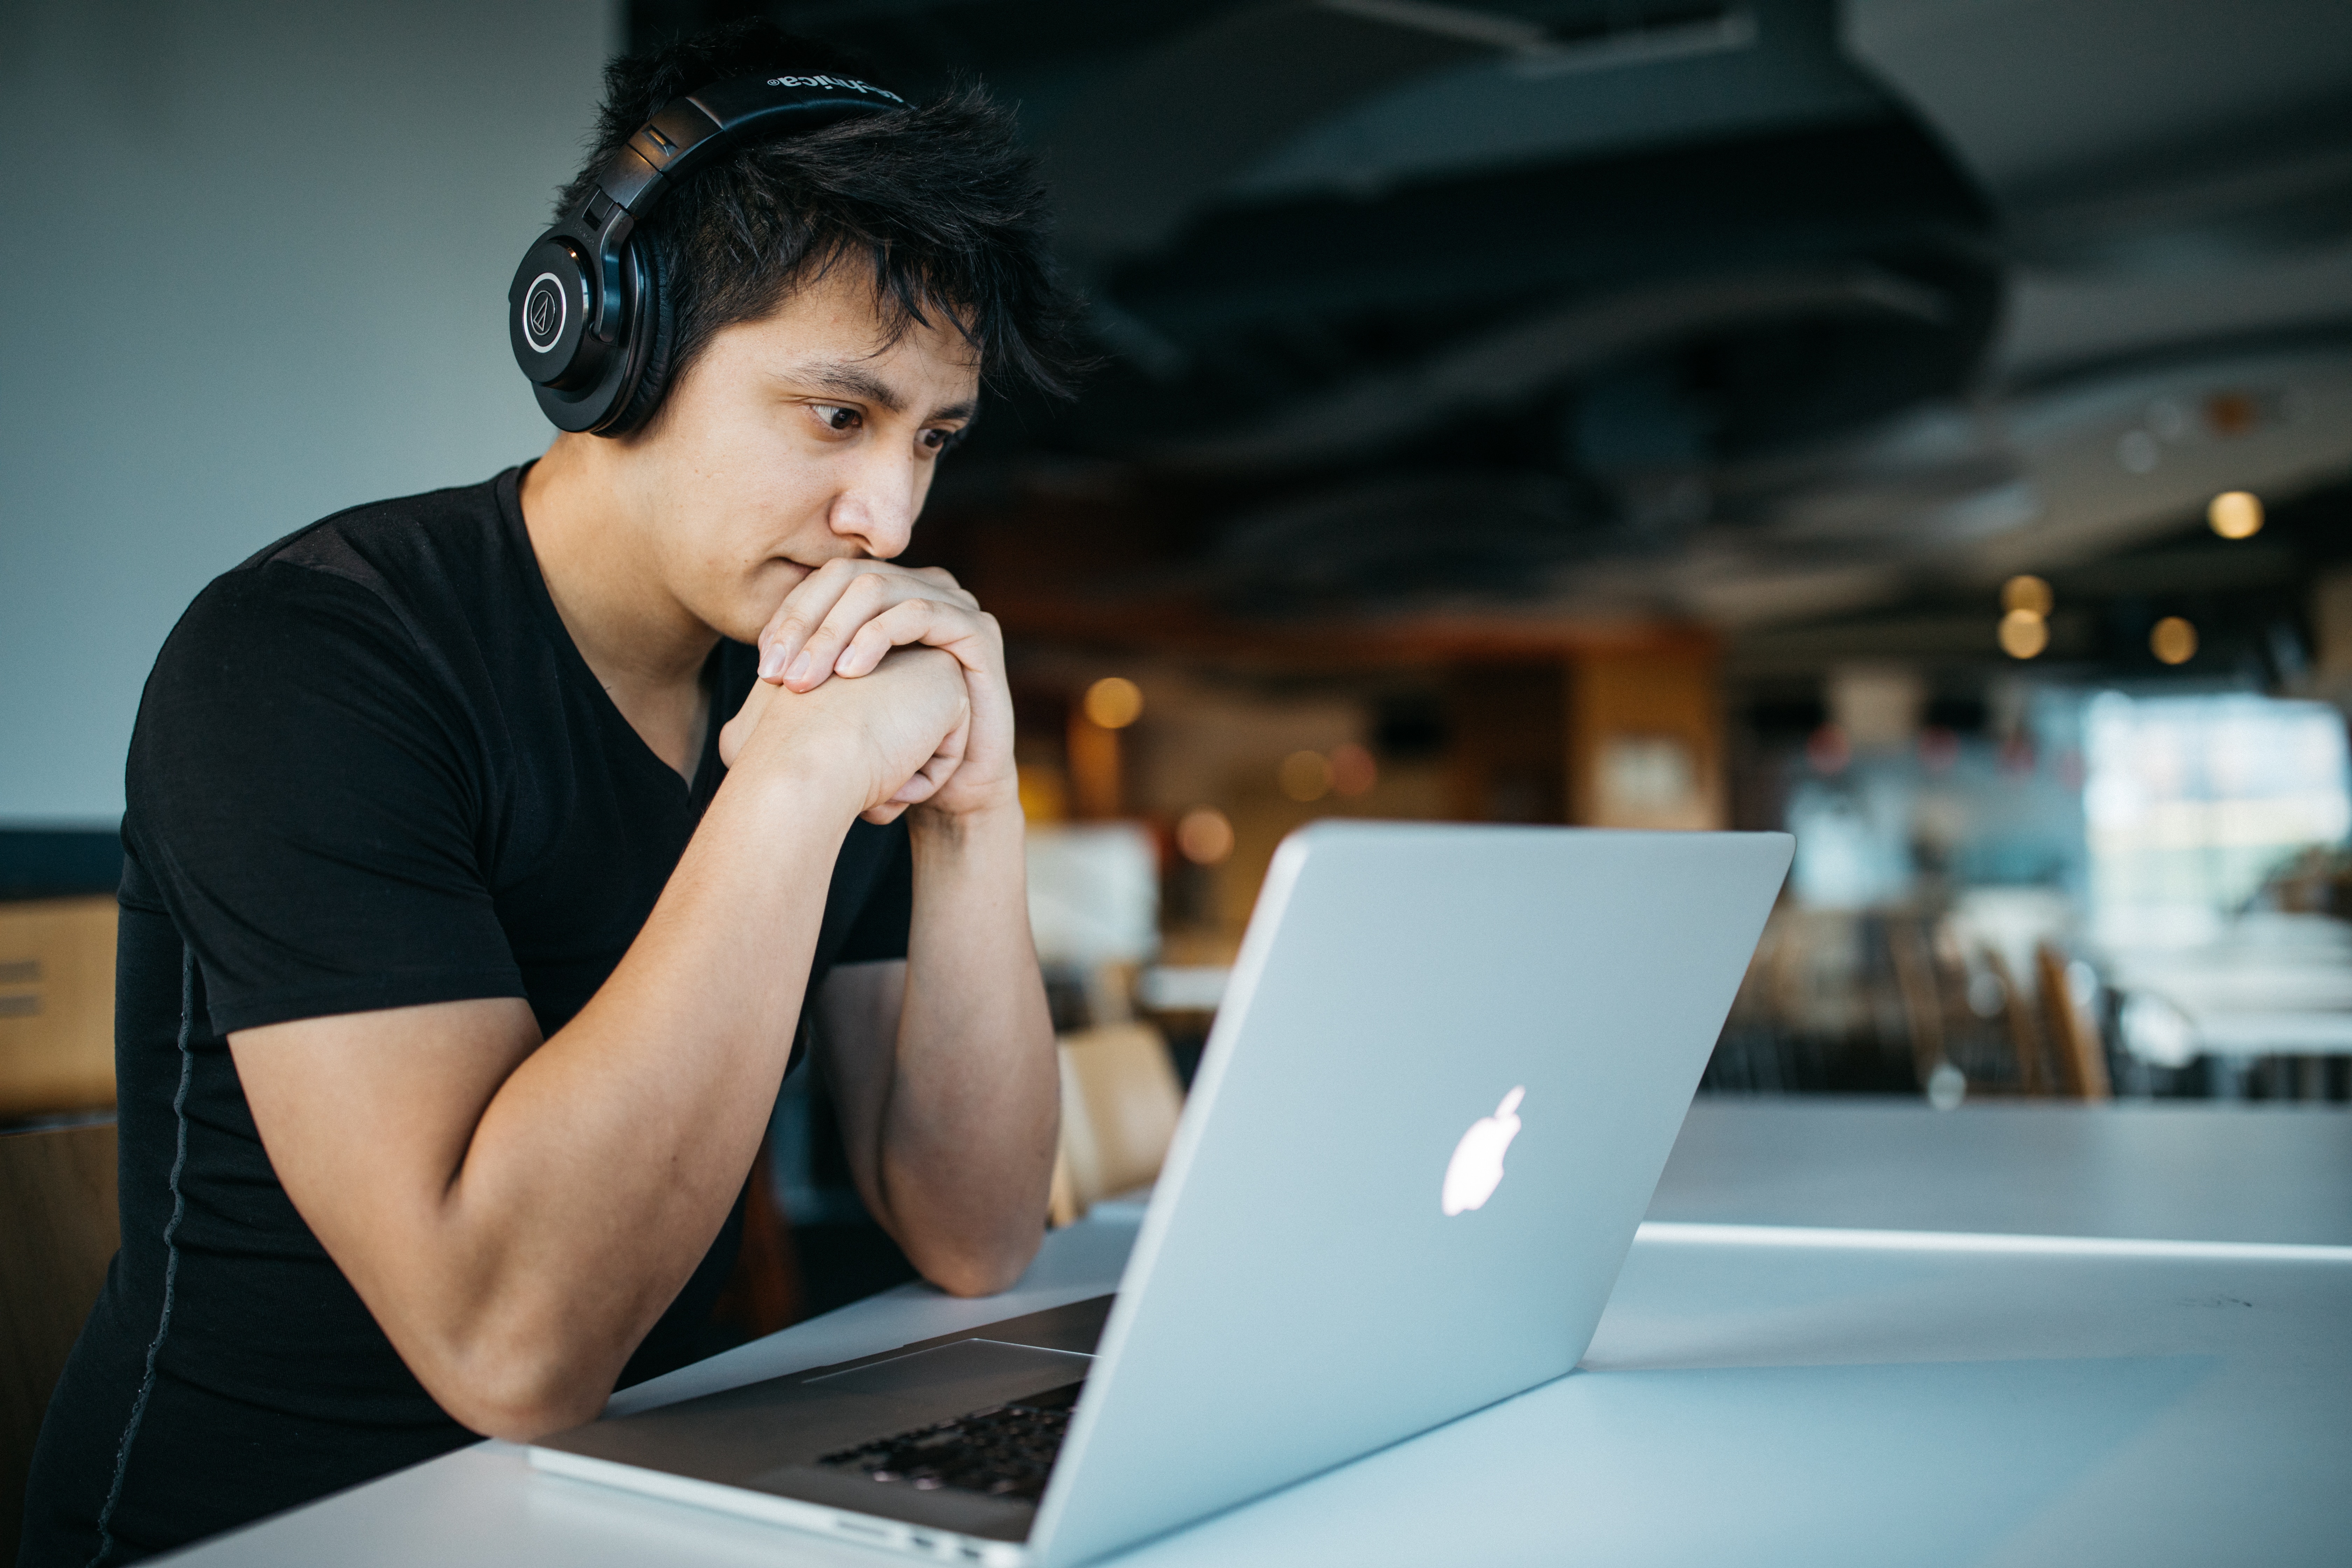 Man studying on his own wearing headphones and watching computer screen